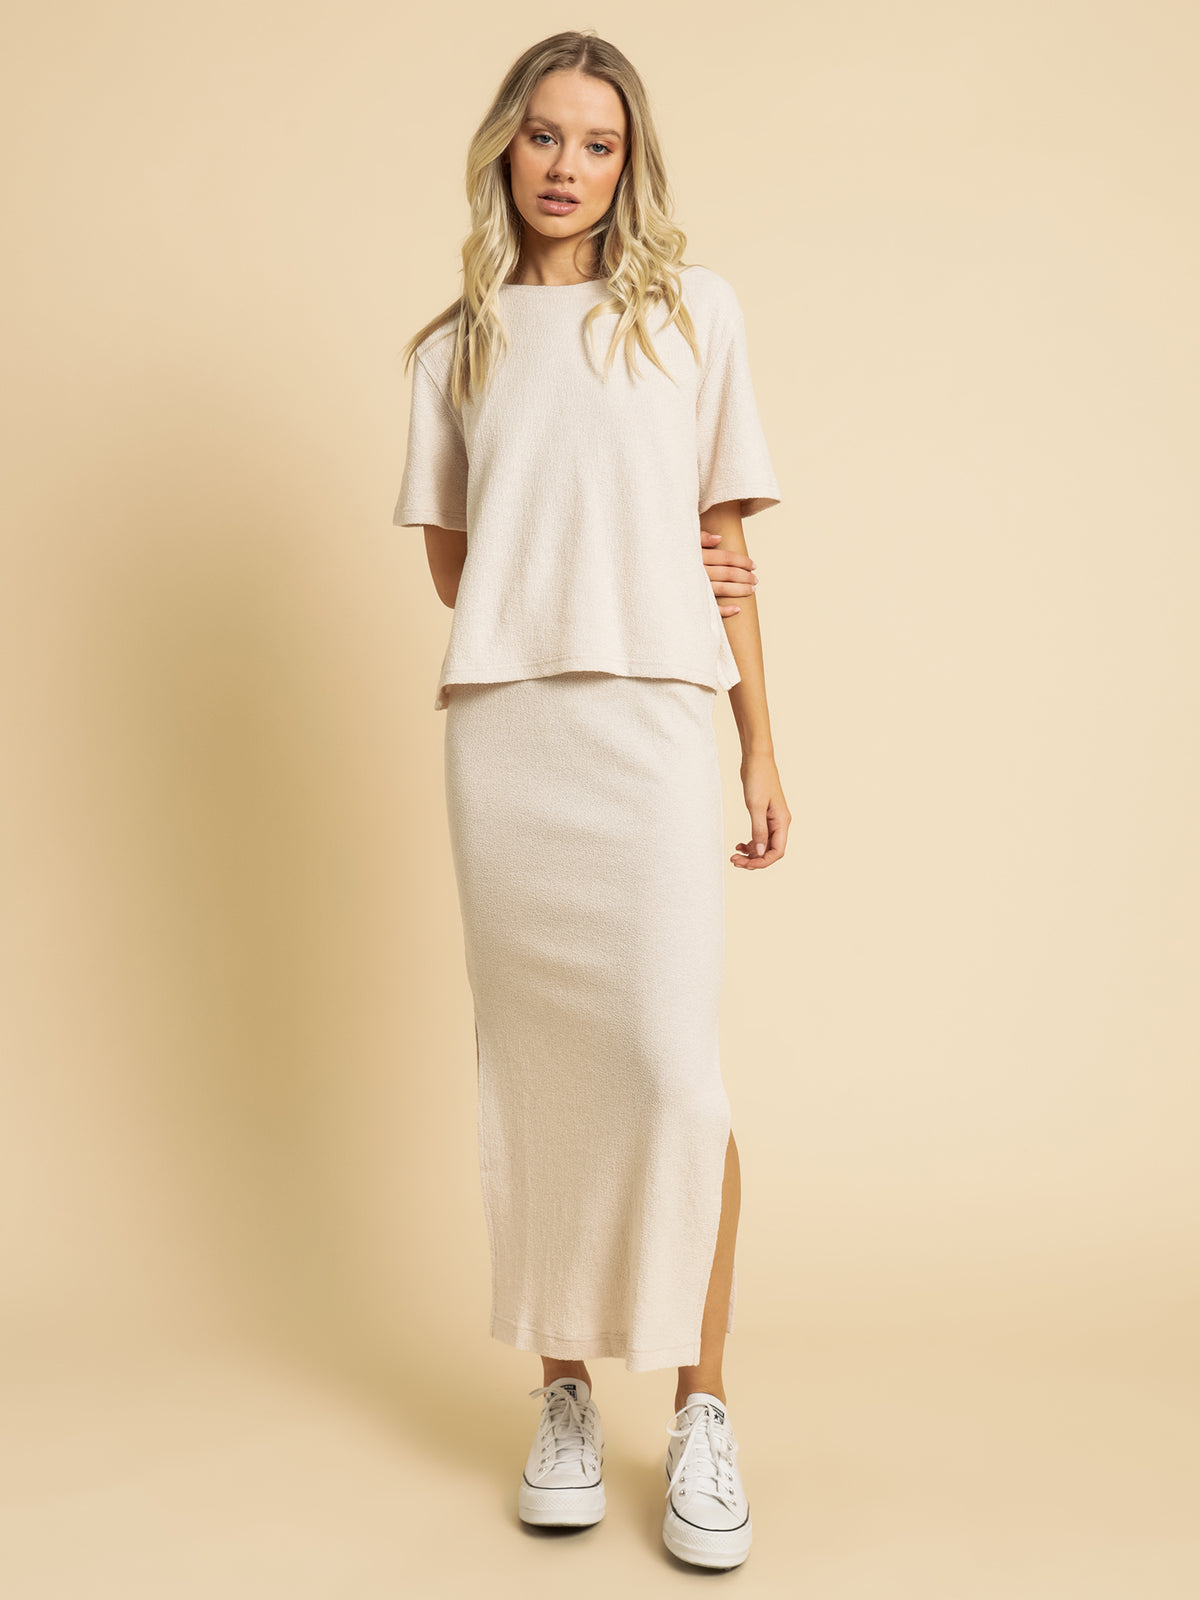 Bowie Textured Midi Skirt in Oat